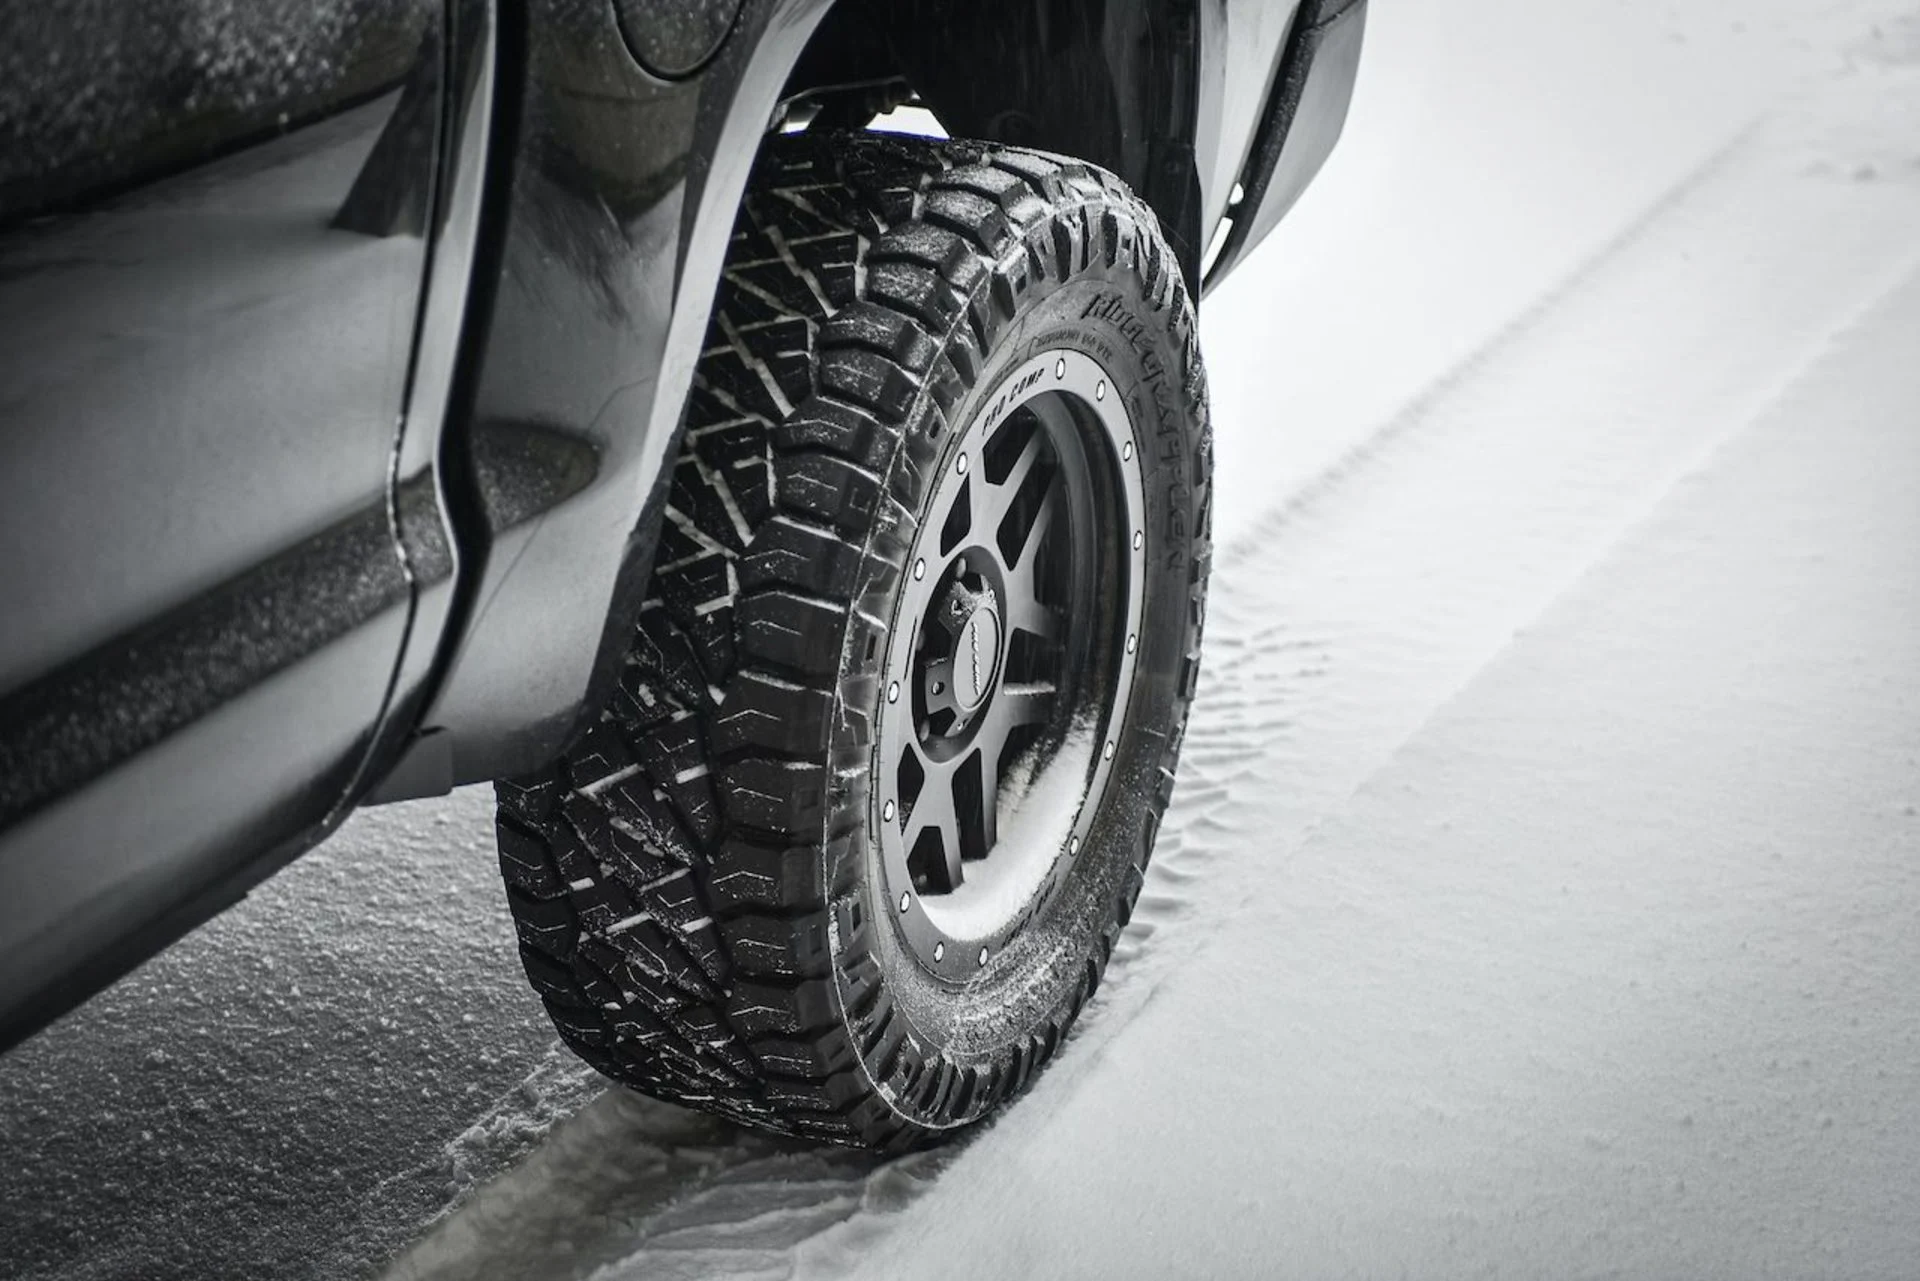 'Unsafe tires' are a concern this winter because of COVID: Study